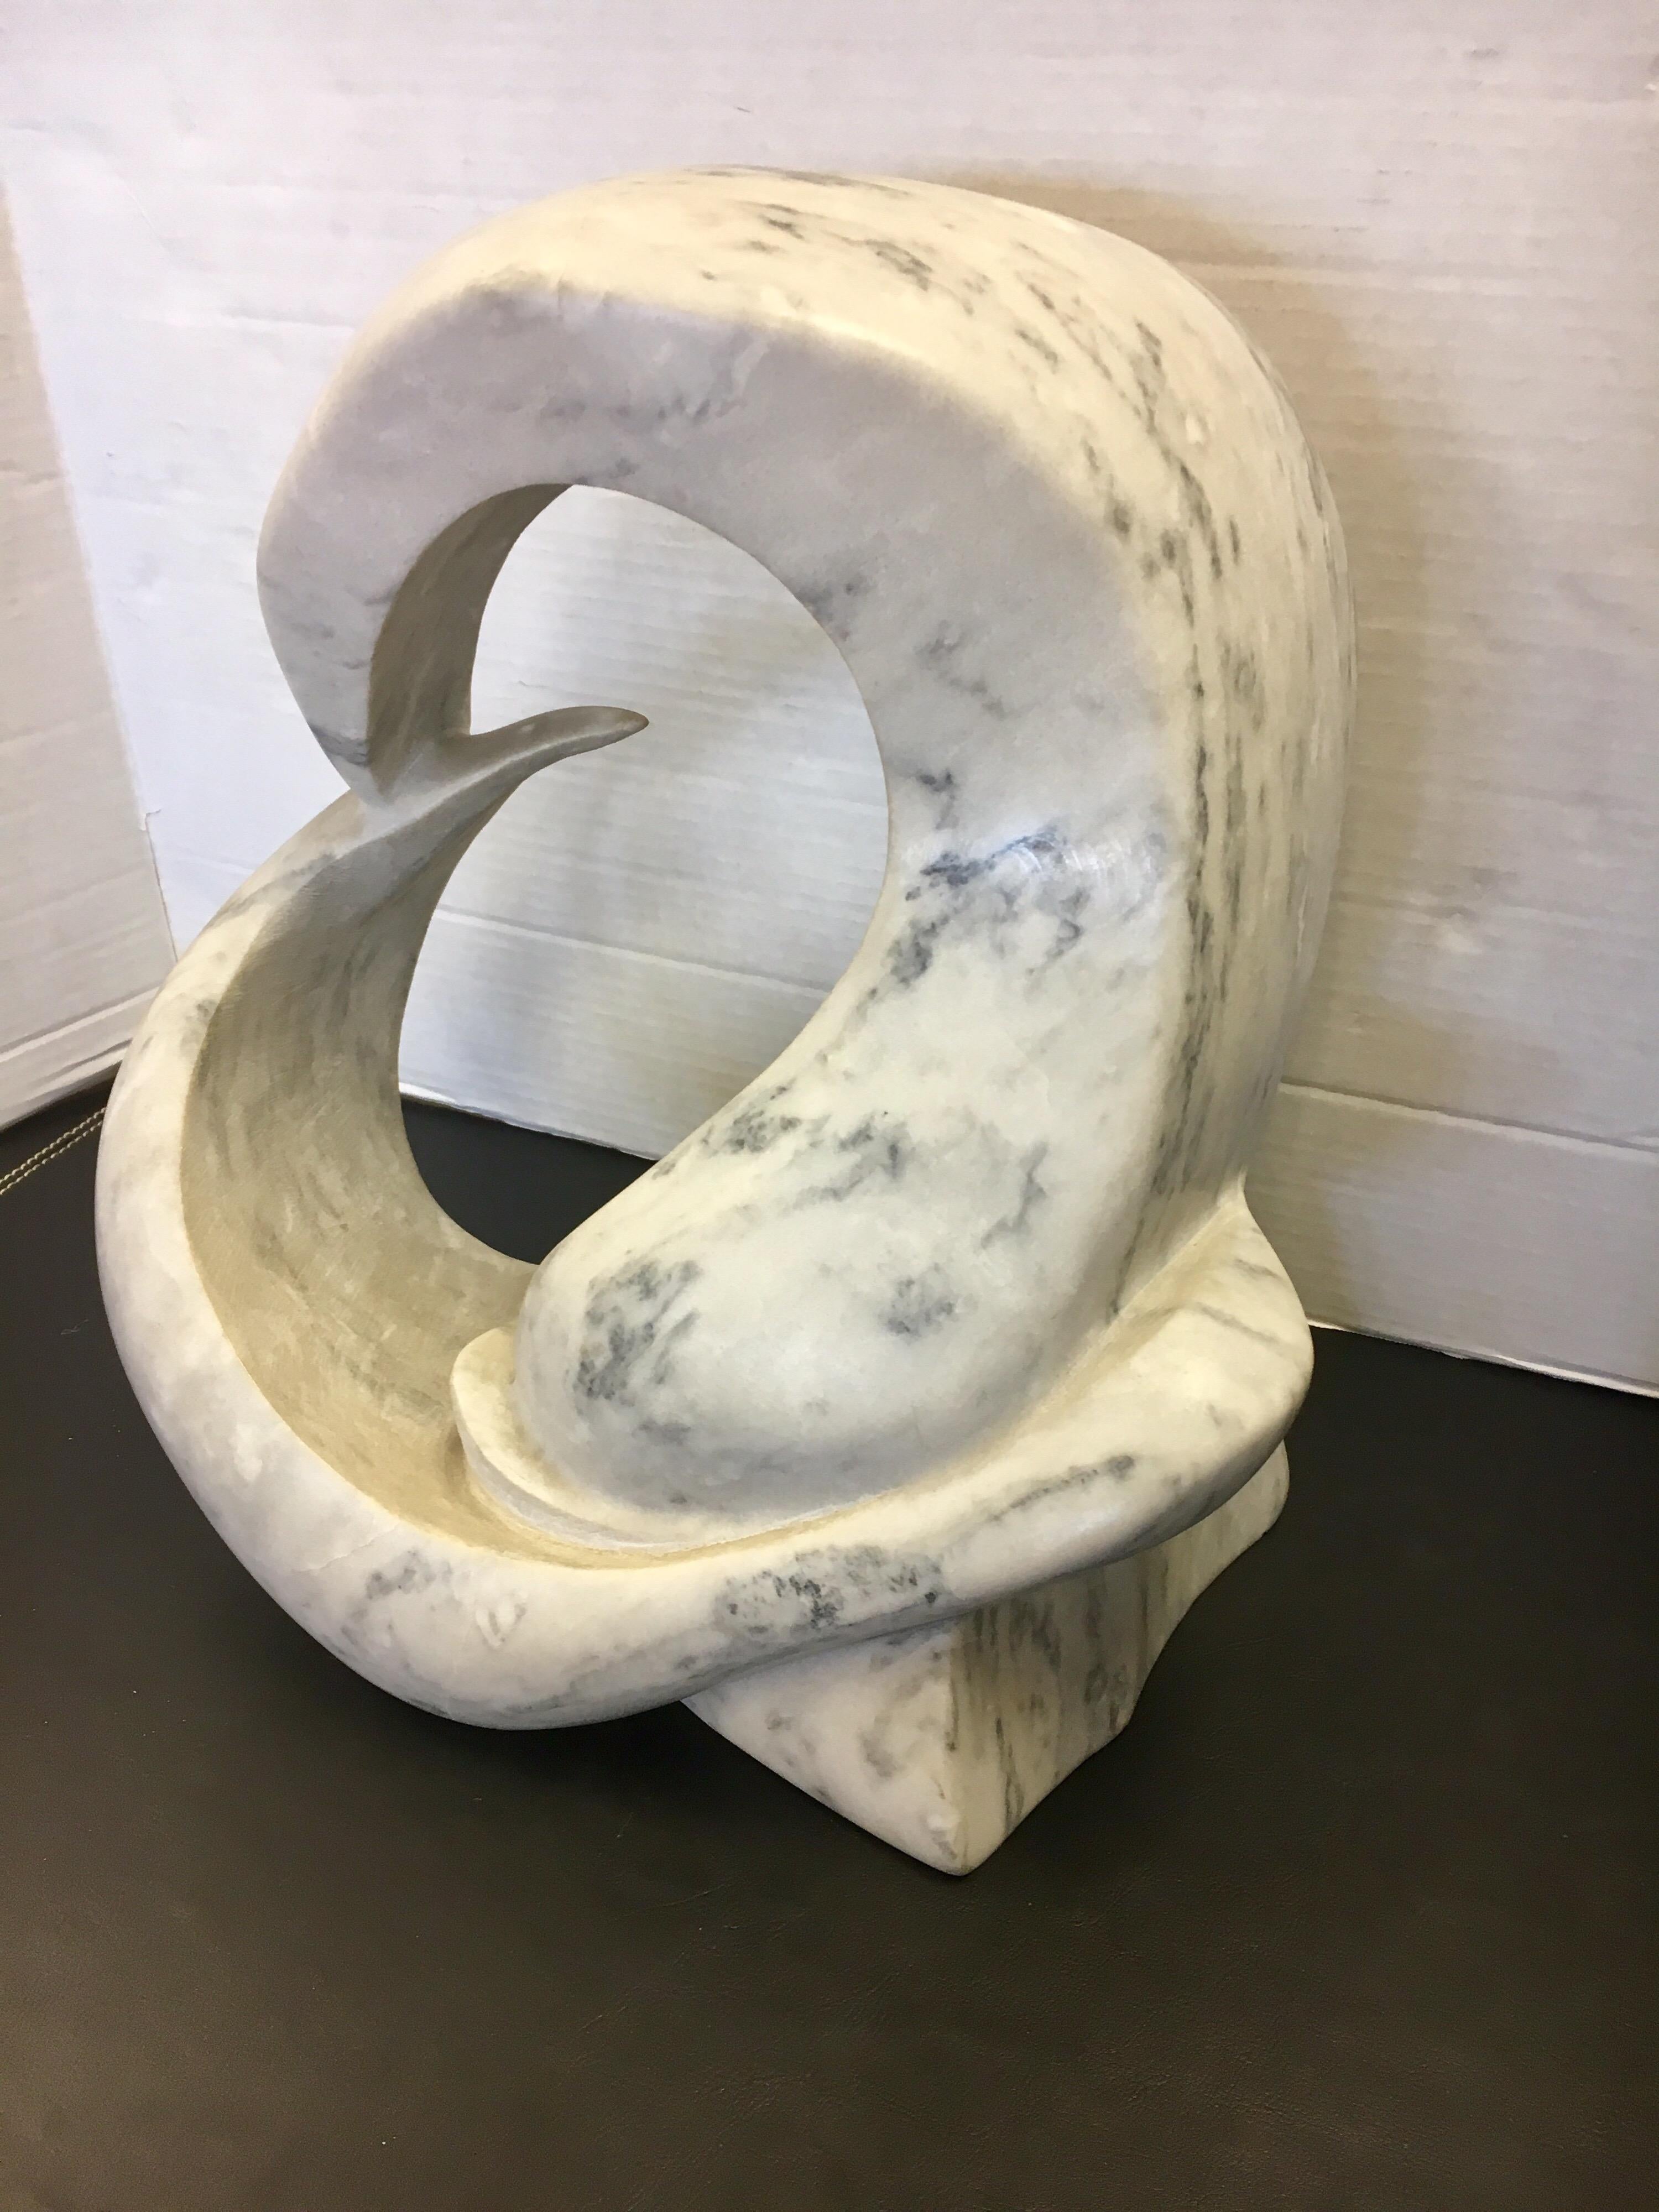 A true work of art is this almost fifty pound Carrara marble abstract sculpture from the 1970s.
Condition is very good with no flaws. We do not see any hallmarks.